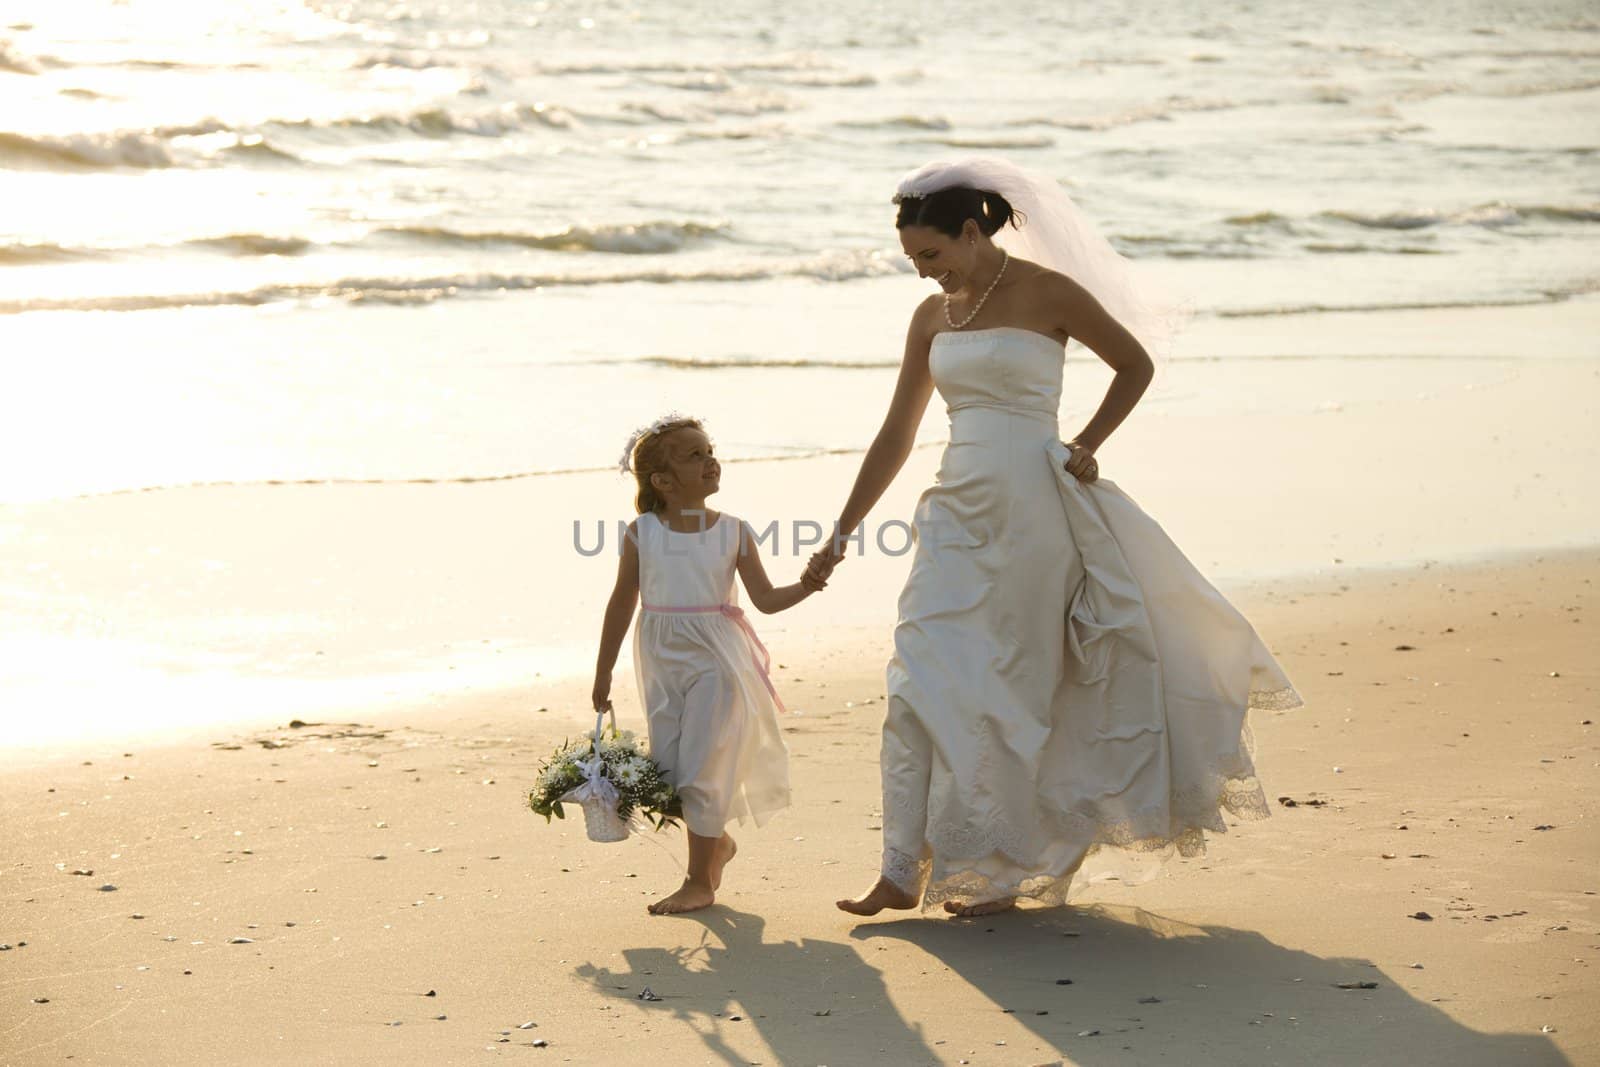 Caucasian mid-adult bride and flower girl holding hands walking barefoot on beach.